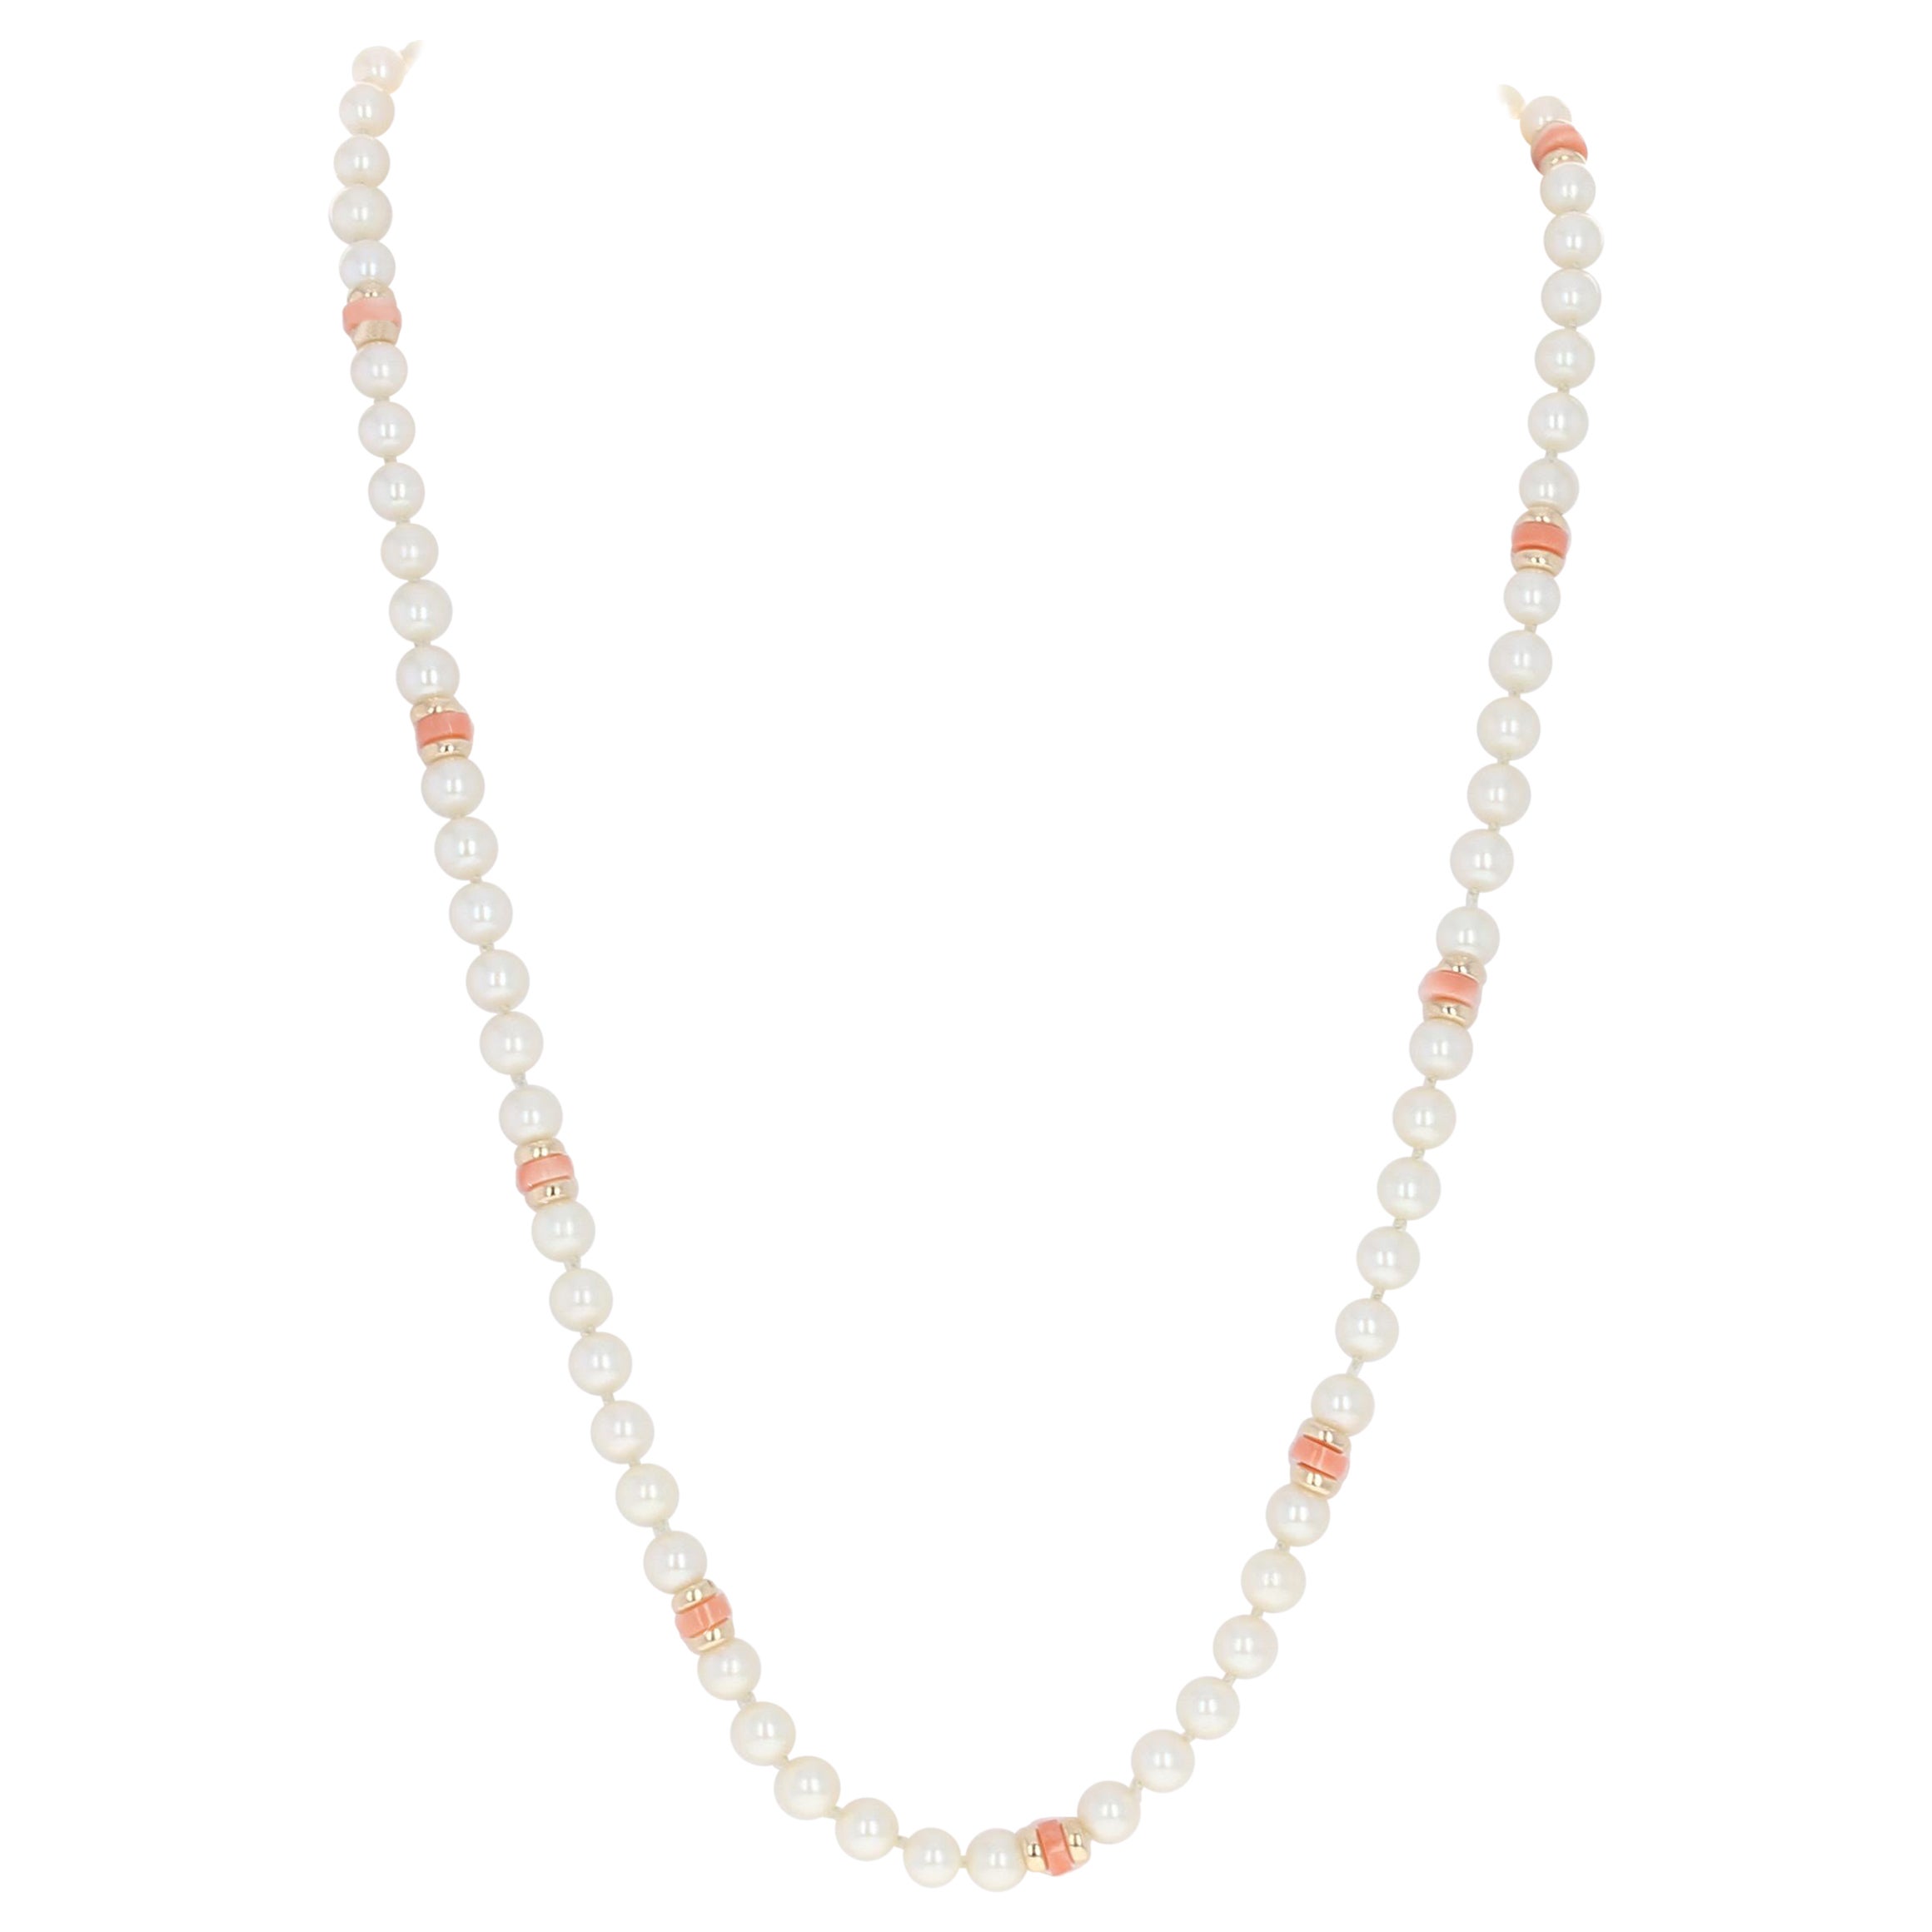 Yellow Gold Freshwater Pearl & Coral Necklace, 14k Knotted Strand